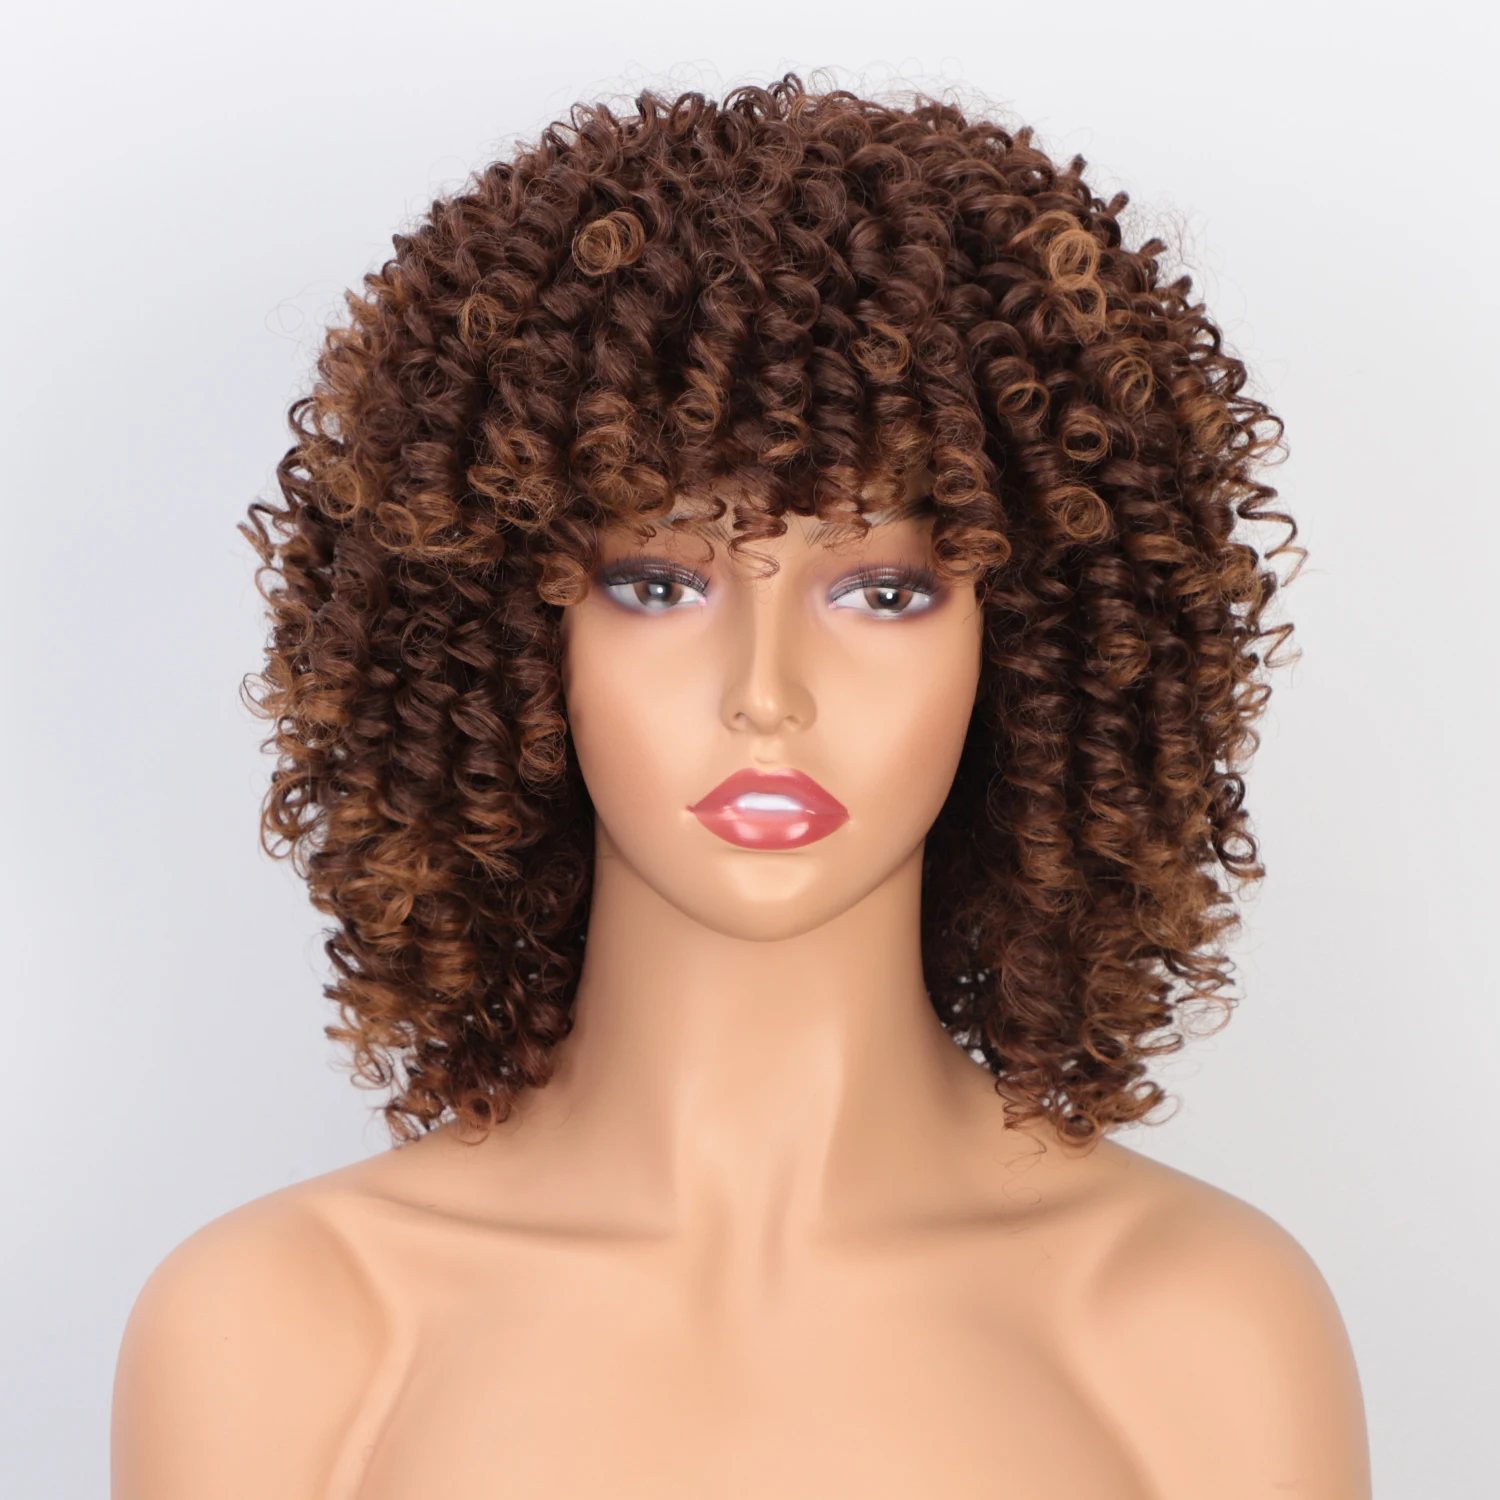 

Kinky Loose Curly Wave Cheapest Wholesale Vendor Afro Brown Short Bob Wig With Bangs Synthetic Hair Wigs For Black Women